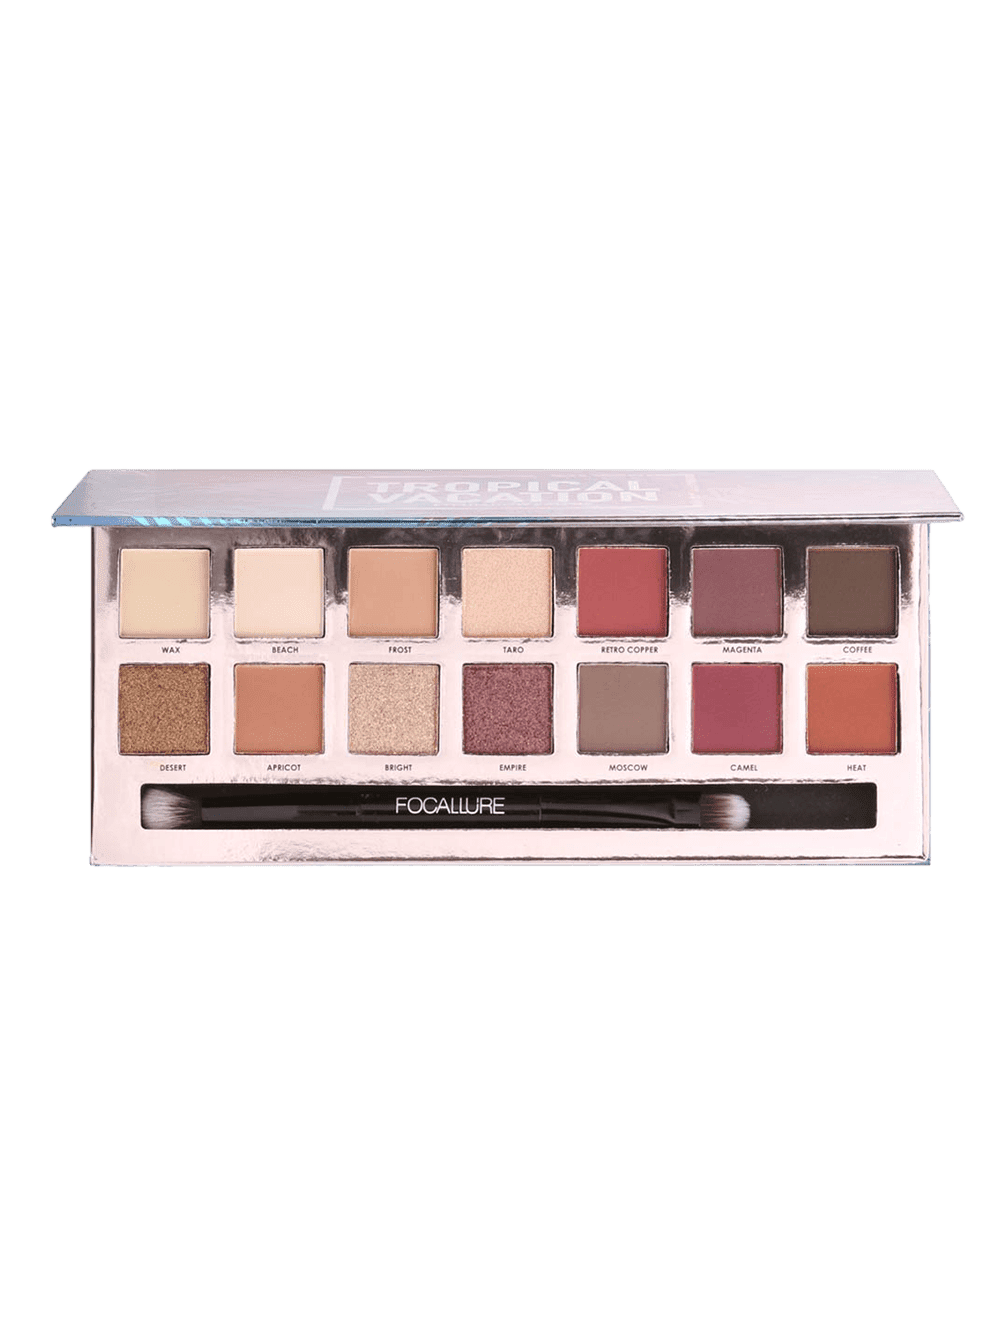 14 Colors Professional Natural Long Lasting Eyeshadow Palette with Brush